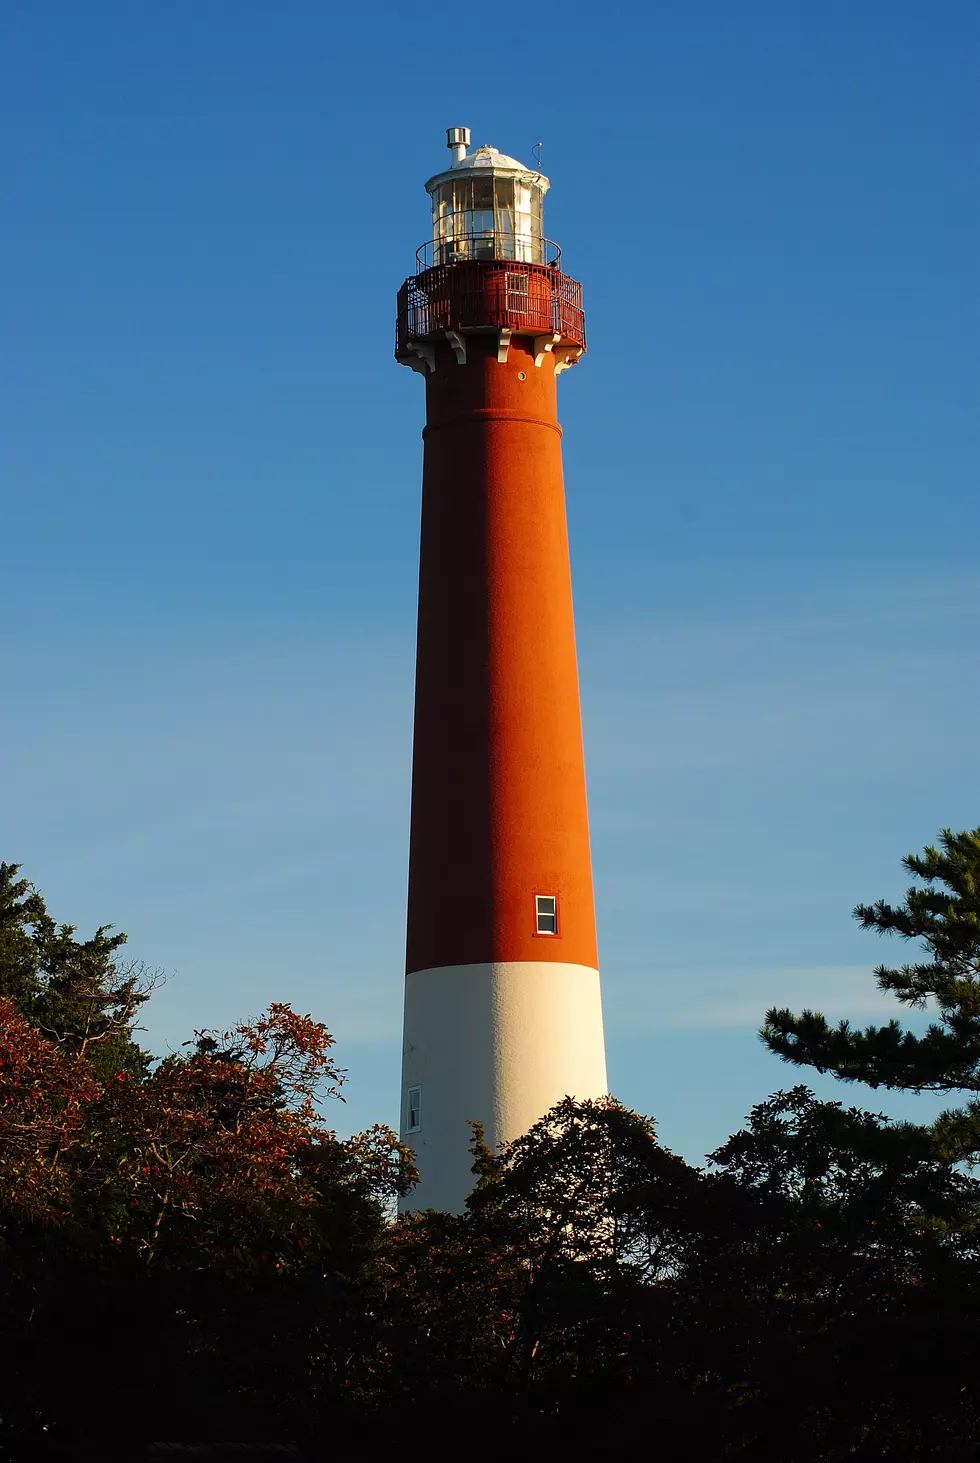 The Iconic Barnegat Lighthouse is Set to Go Back Into Service By End of the Month